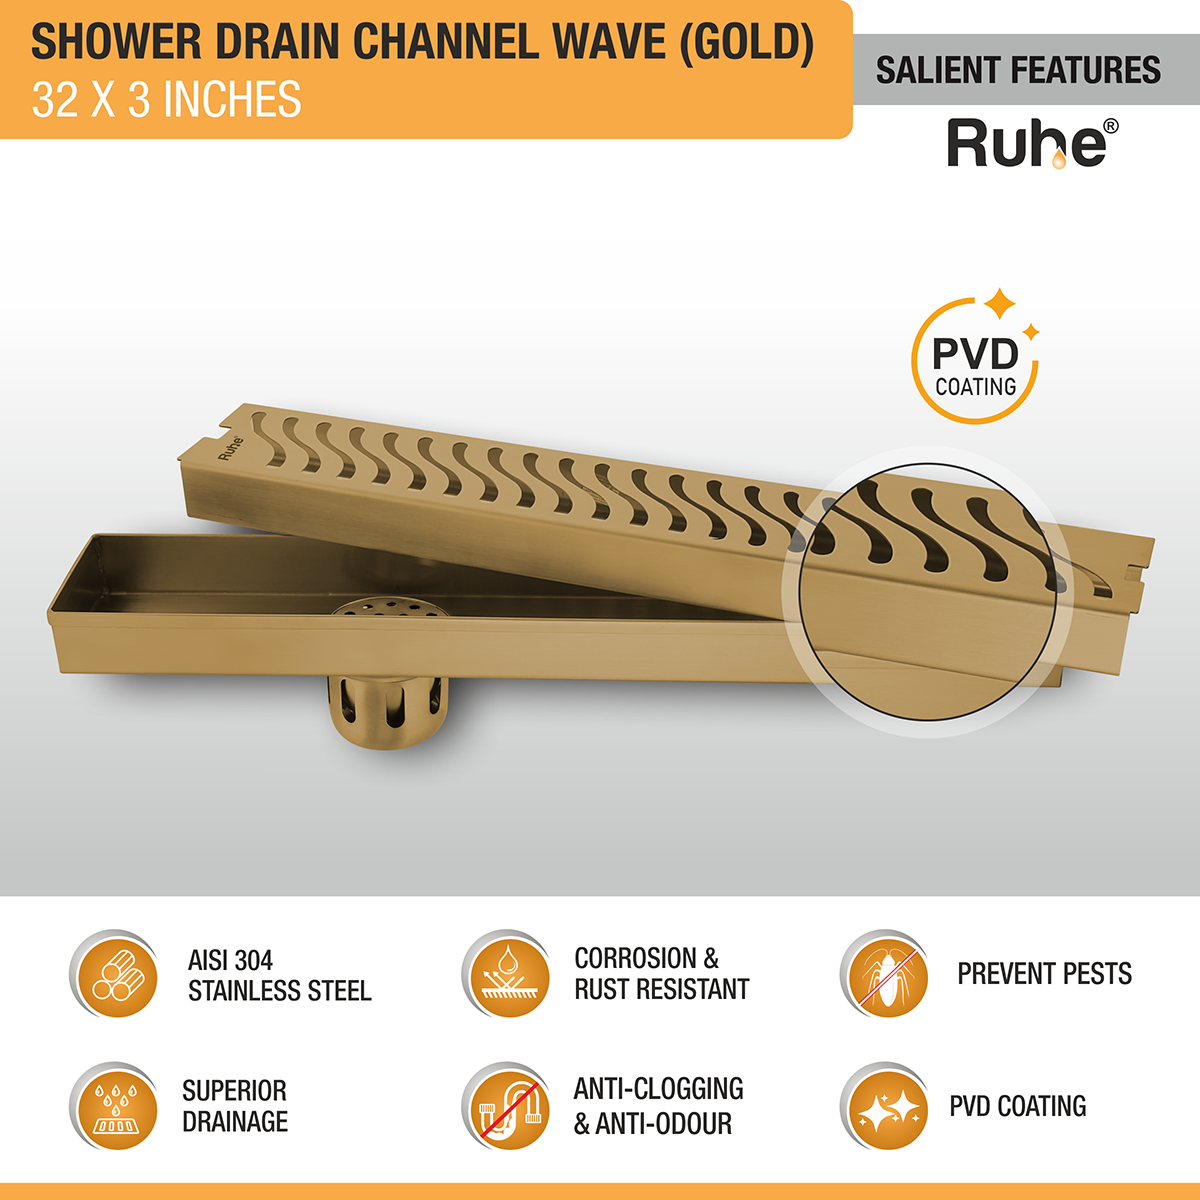 Wave Shower Drain Channel (32 x 3 Inches) YELLOW GOLD features